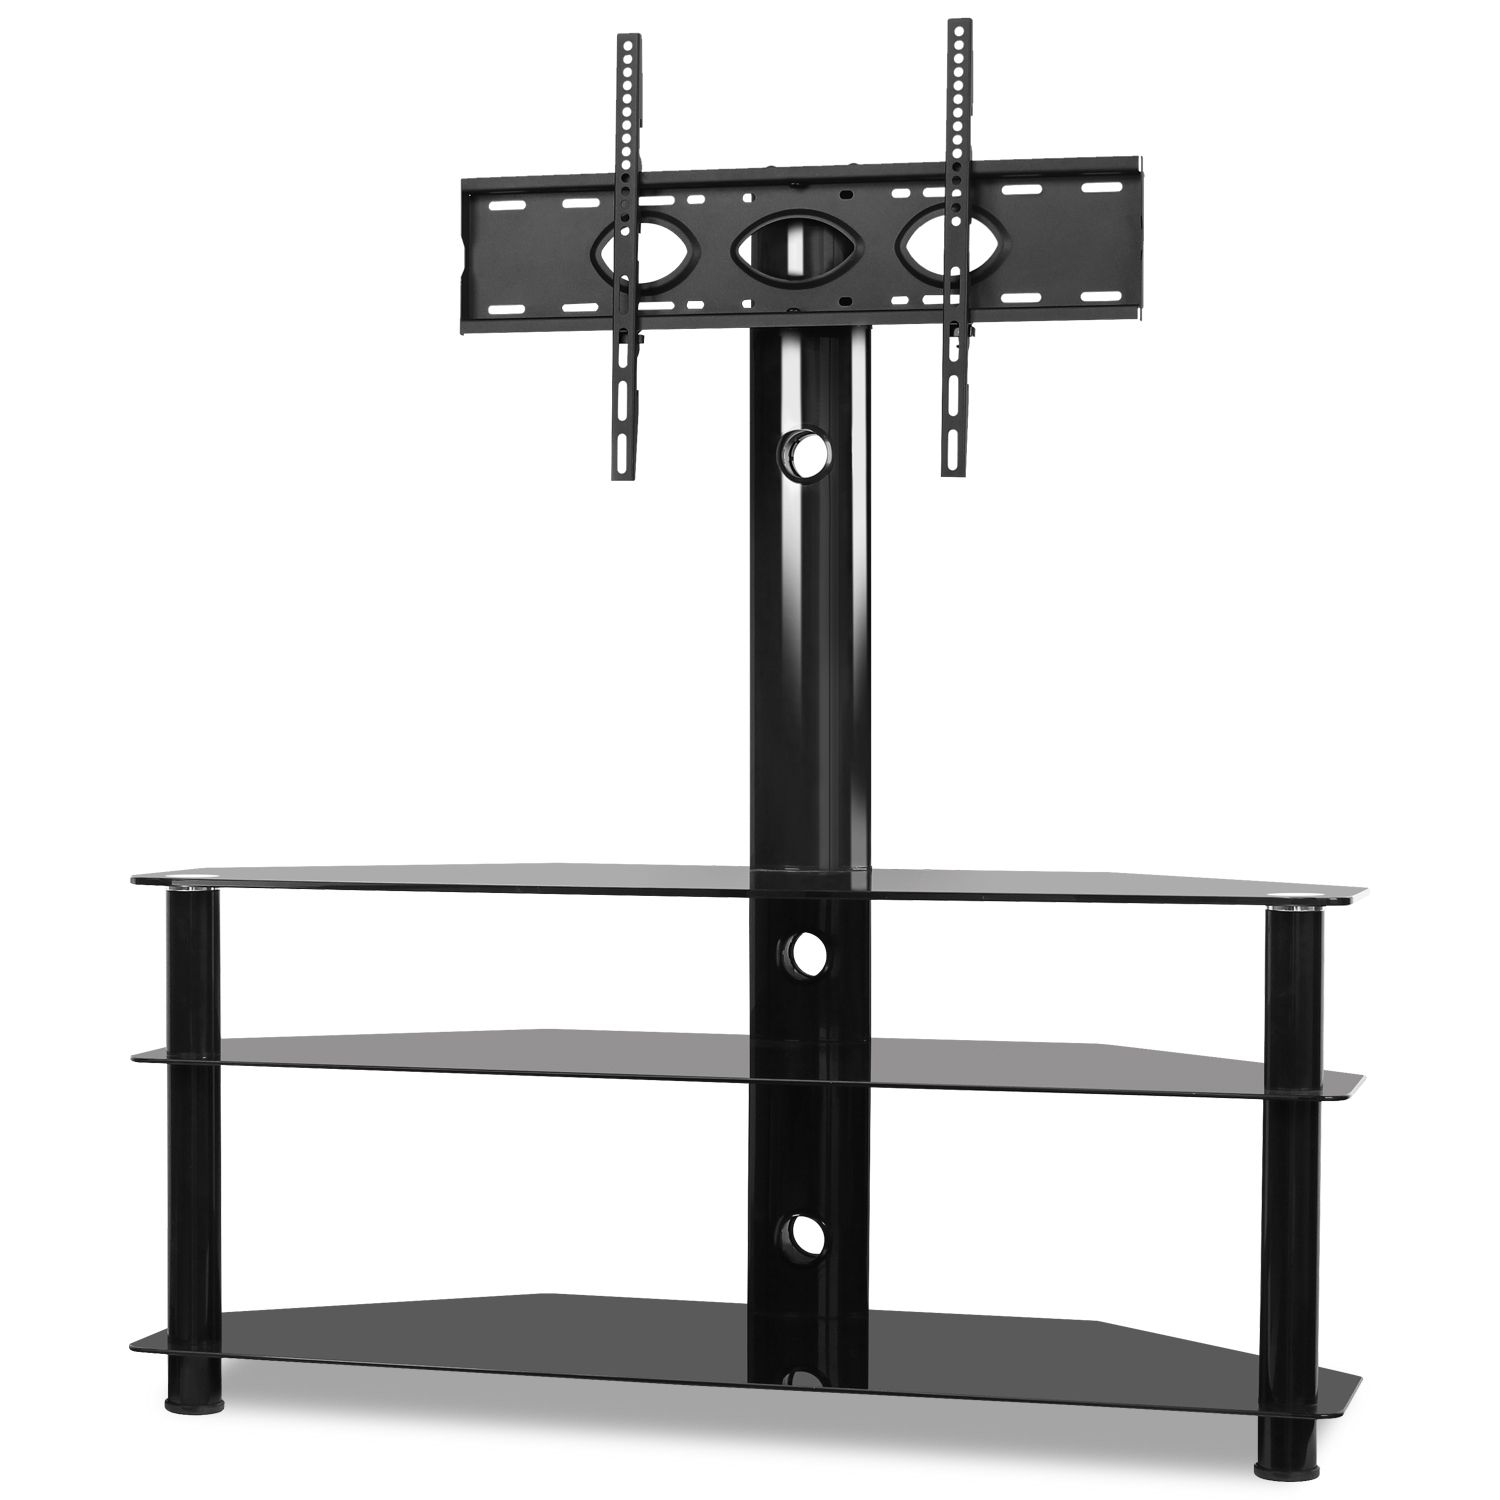 Rfiver Floor Corner Tv Stand With Swivel Mount Bracket For Pertaining To Corner Tv Stands For 60 Inch Flat Screens (View 15 of 15)